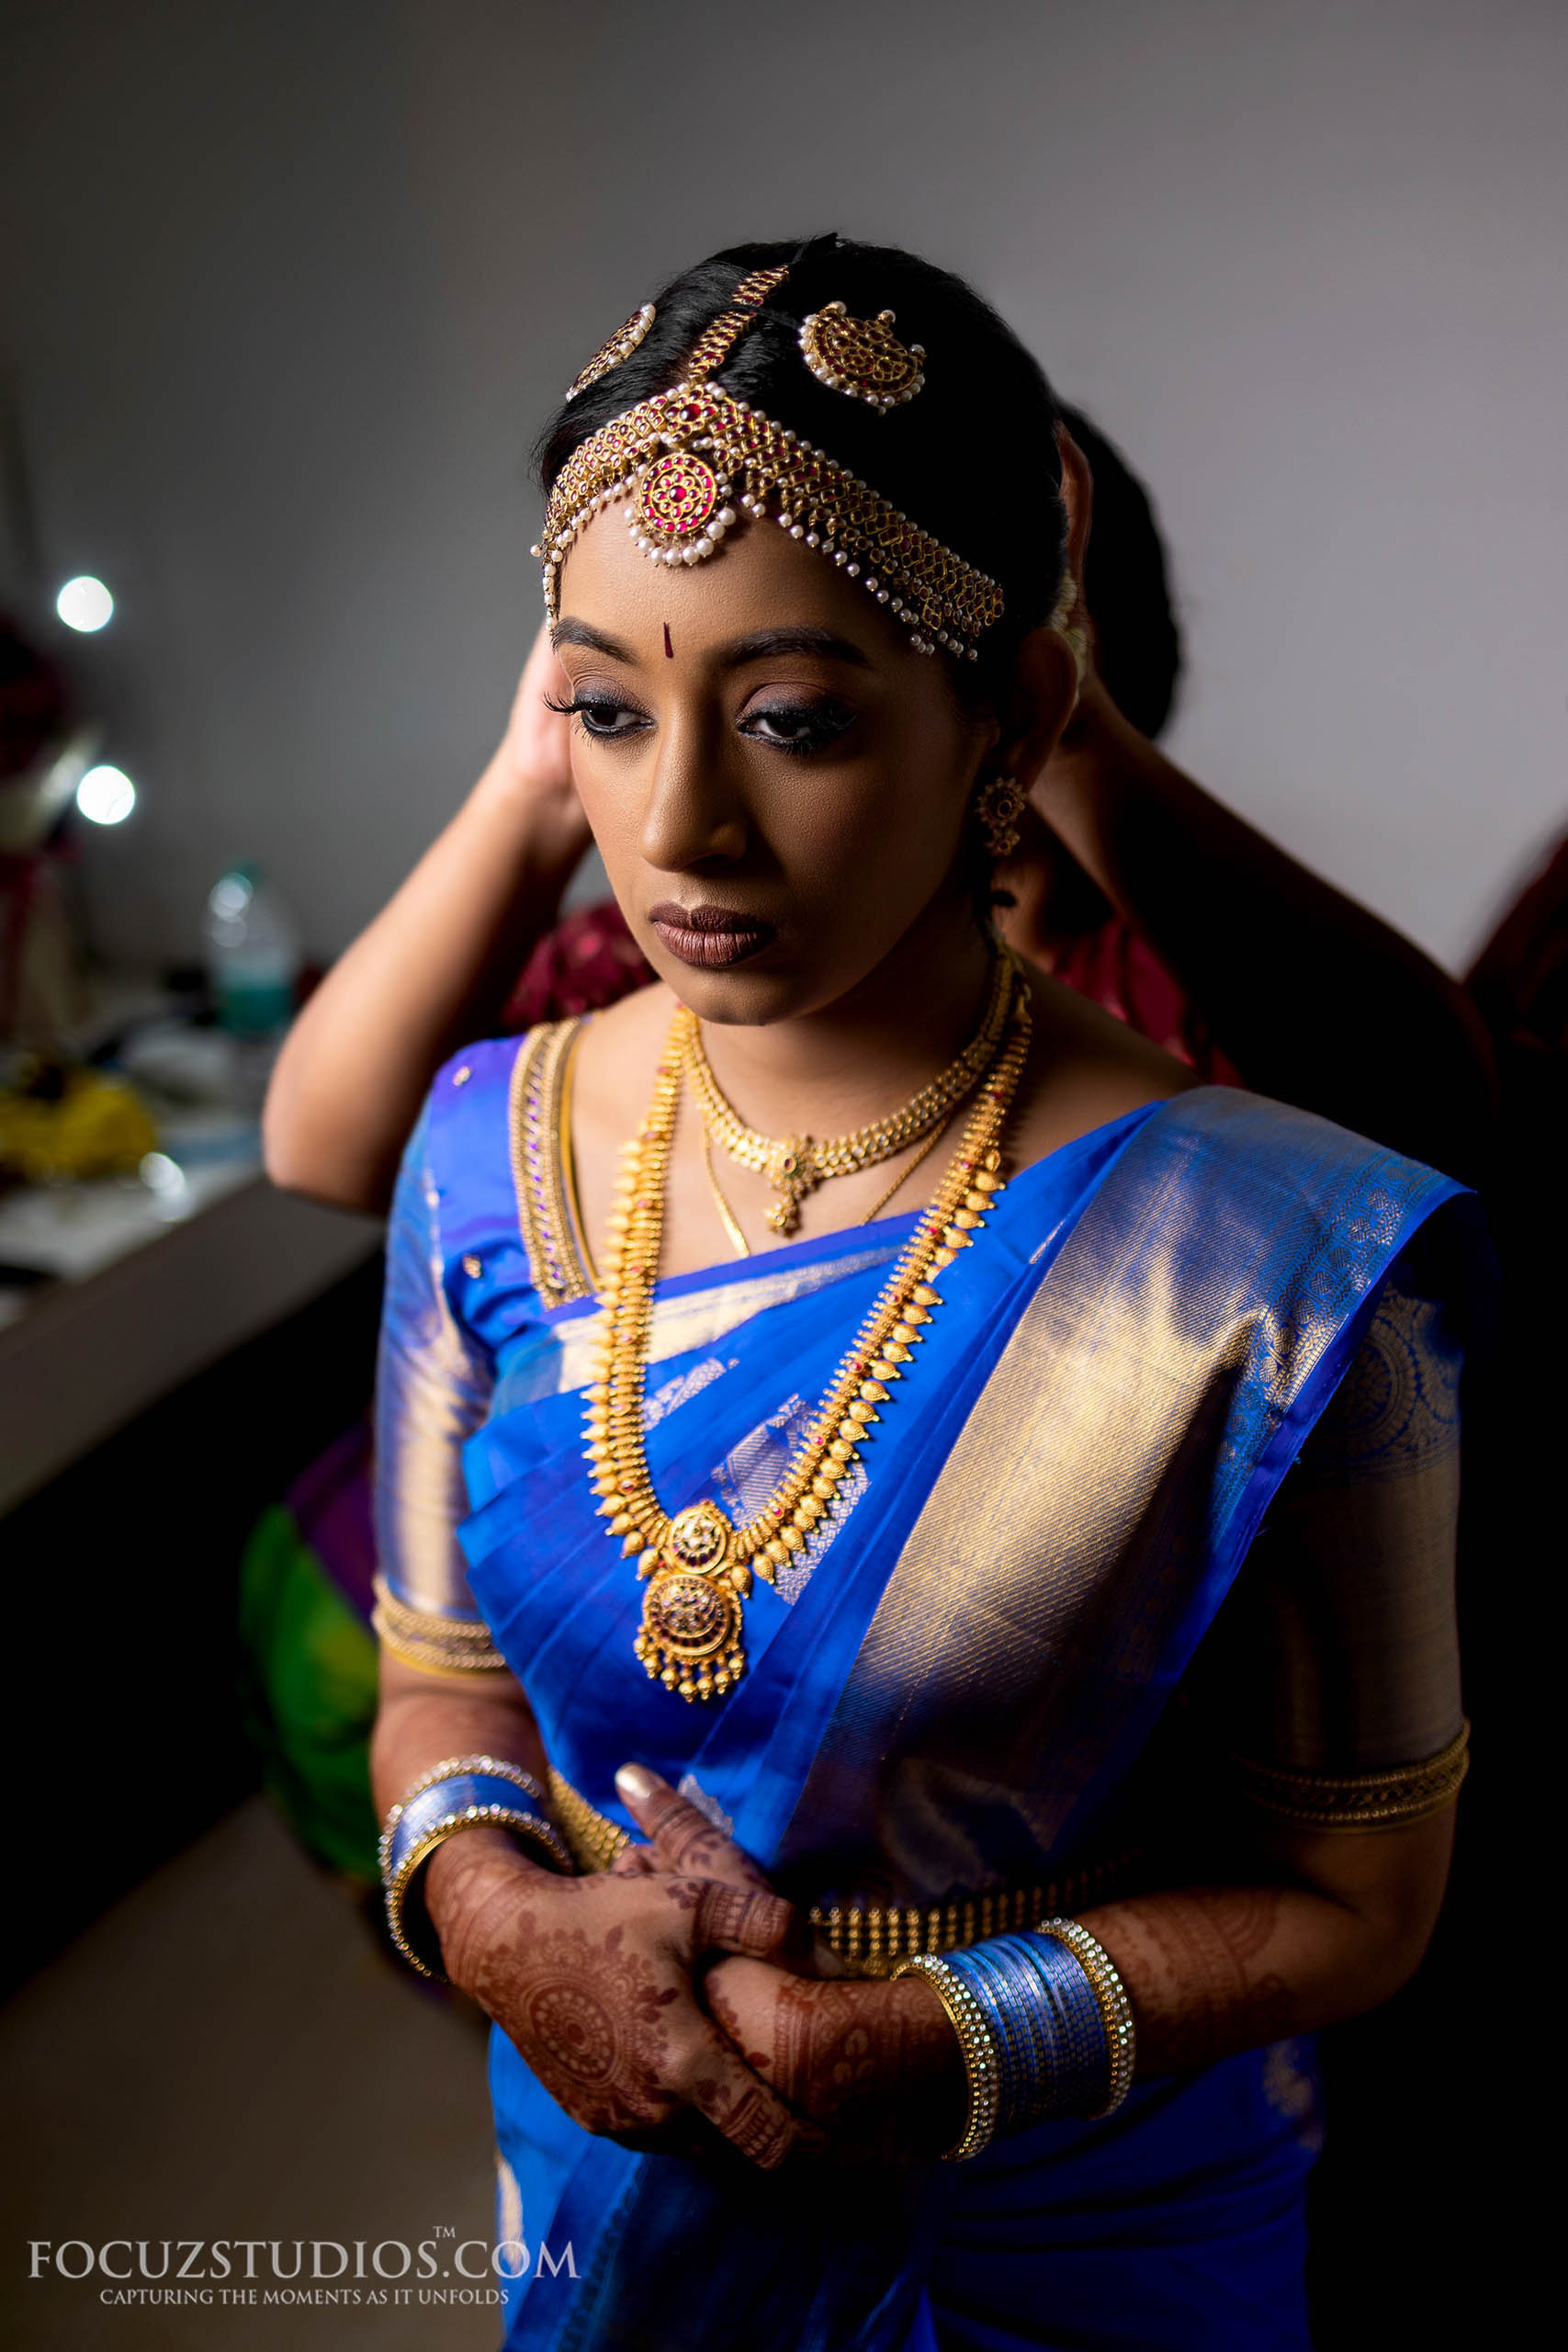 south-indian-bride-getting-ready-candid-wedding-photography-13